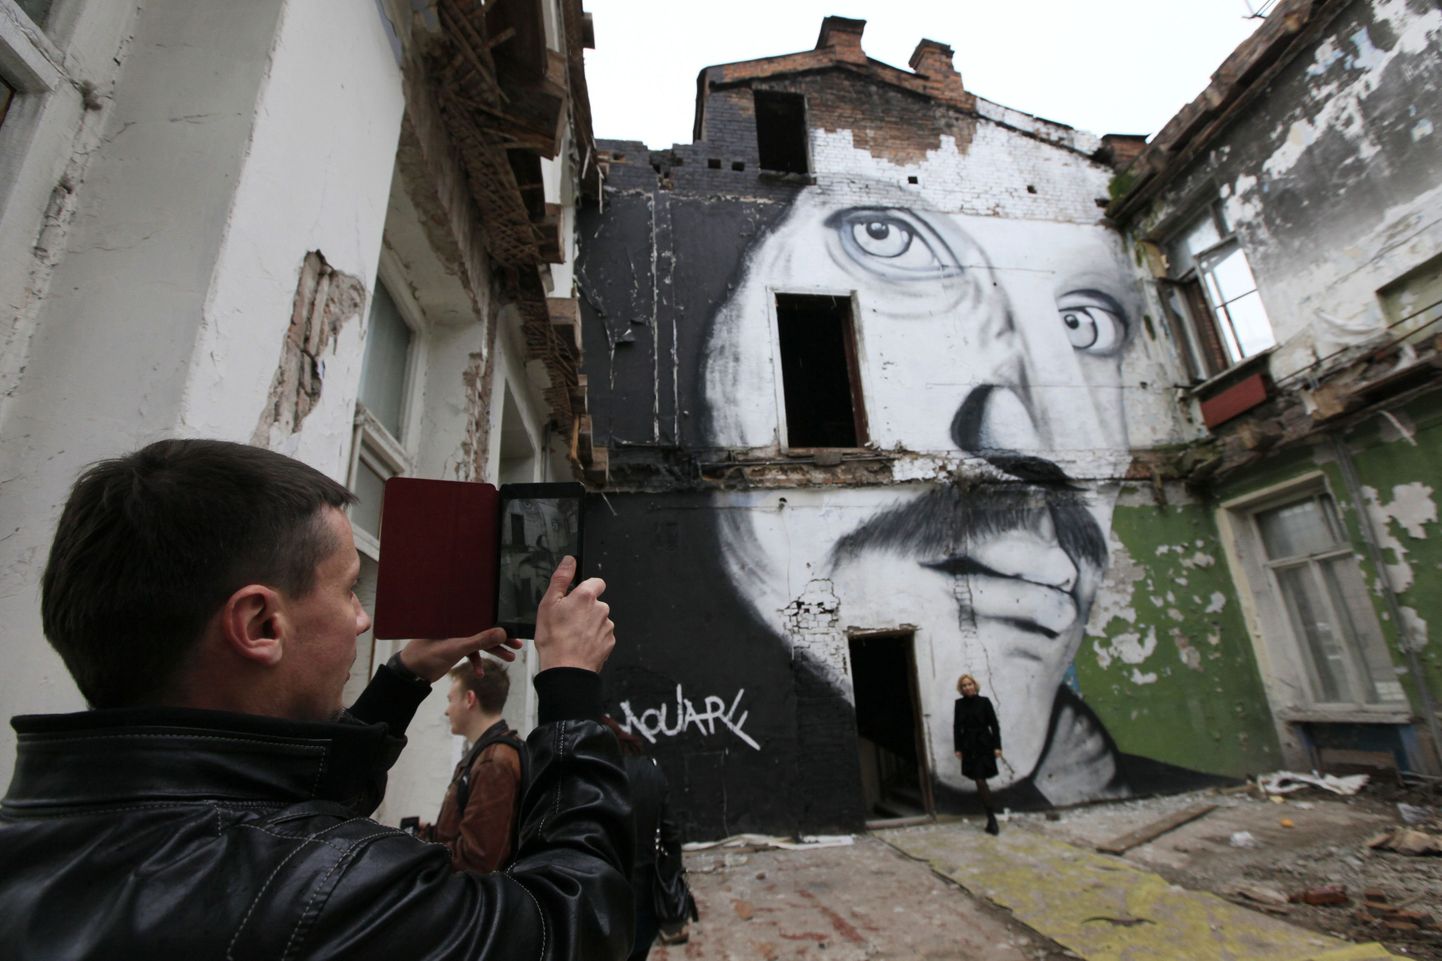 A visitor takes a photograph of an abandoned house painted with a portrait of  Russian actor Alexander Kaidanovsky by French artist The Mouarf, in the centre of Russia's Siberian city of Krasnoyarsk October 14, 2013. The street portrait of Kaidanovsky is part of the 10th International Museum Biennale  in Krasnoyarsk. REUTERS/Ilya Naymushin (RUSSIA - Tags: SOCIETY)